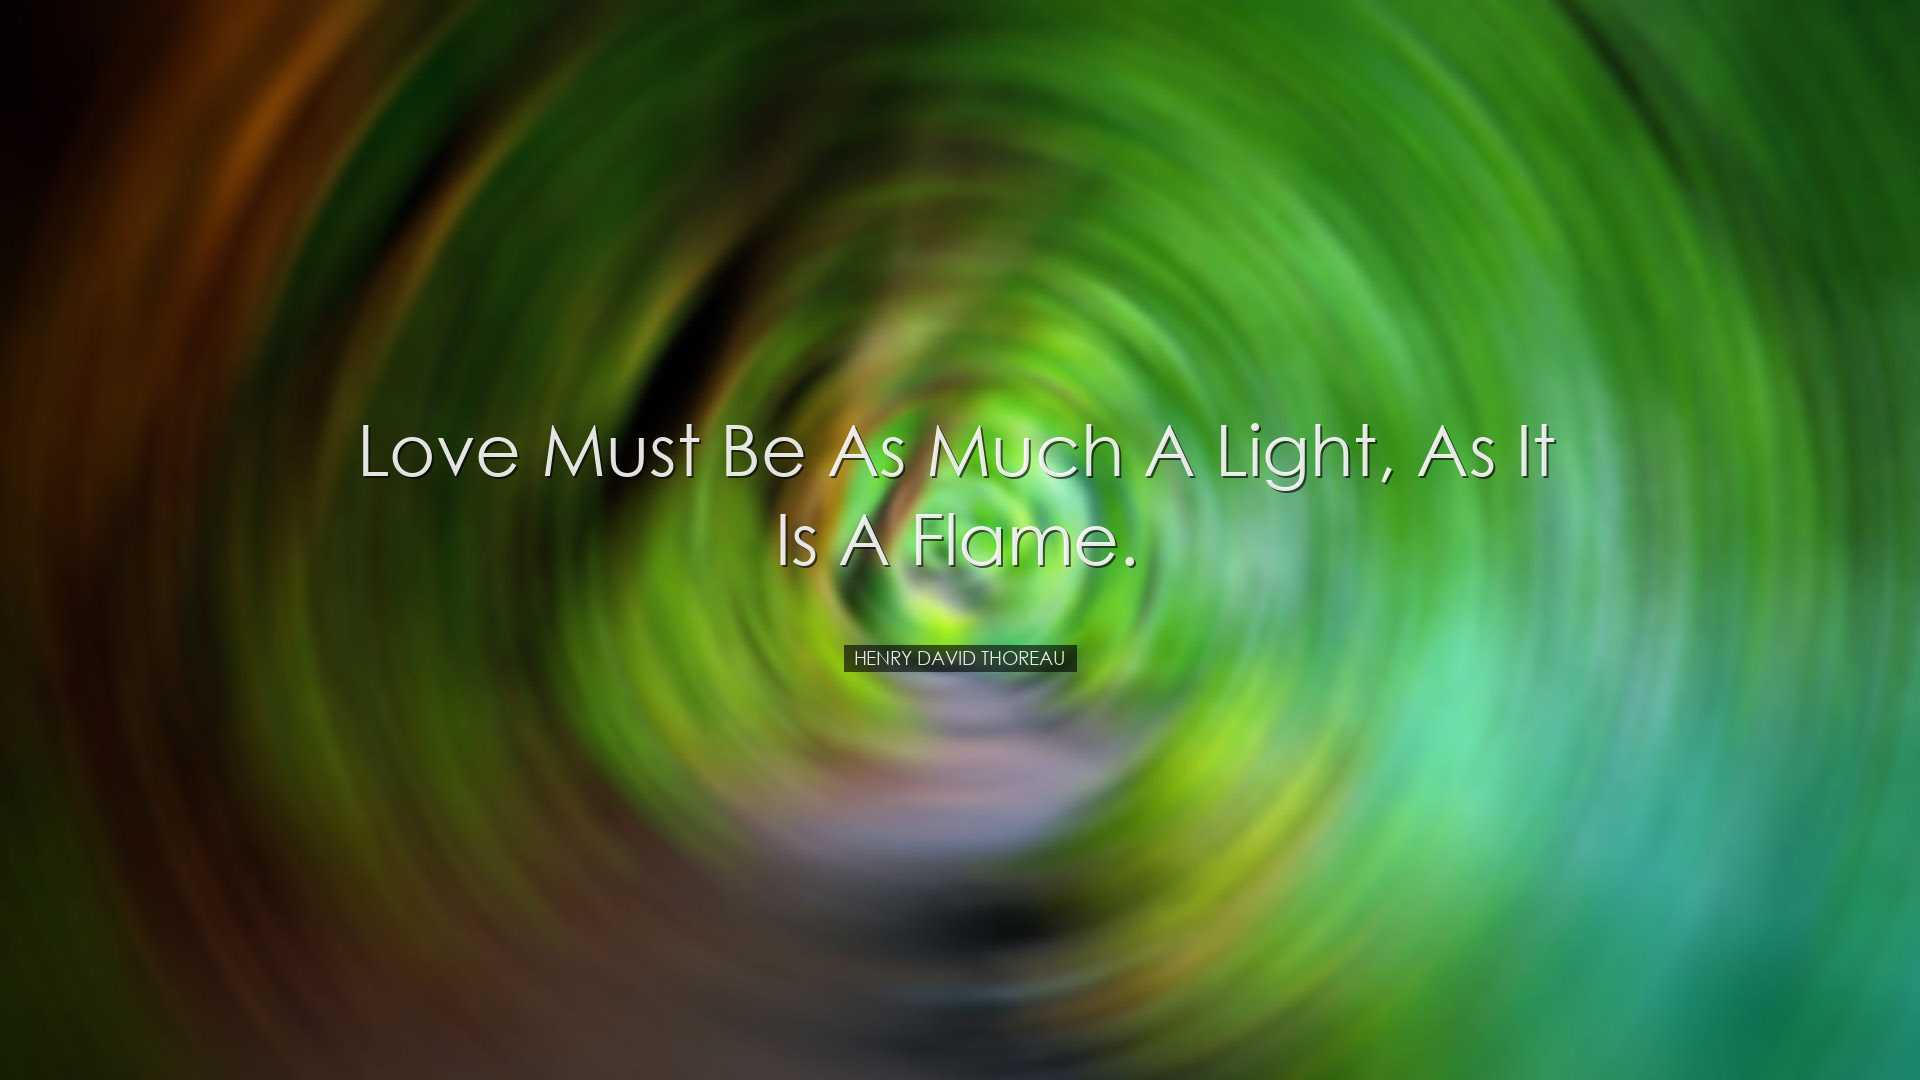 Love must be as much a light, as it is a flame. - Henry David Thor